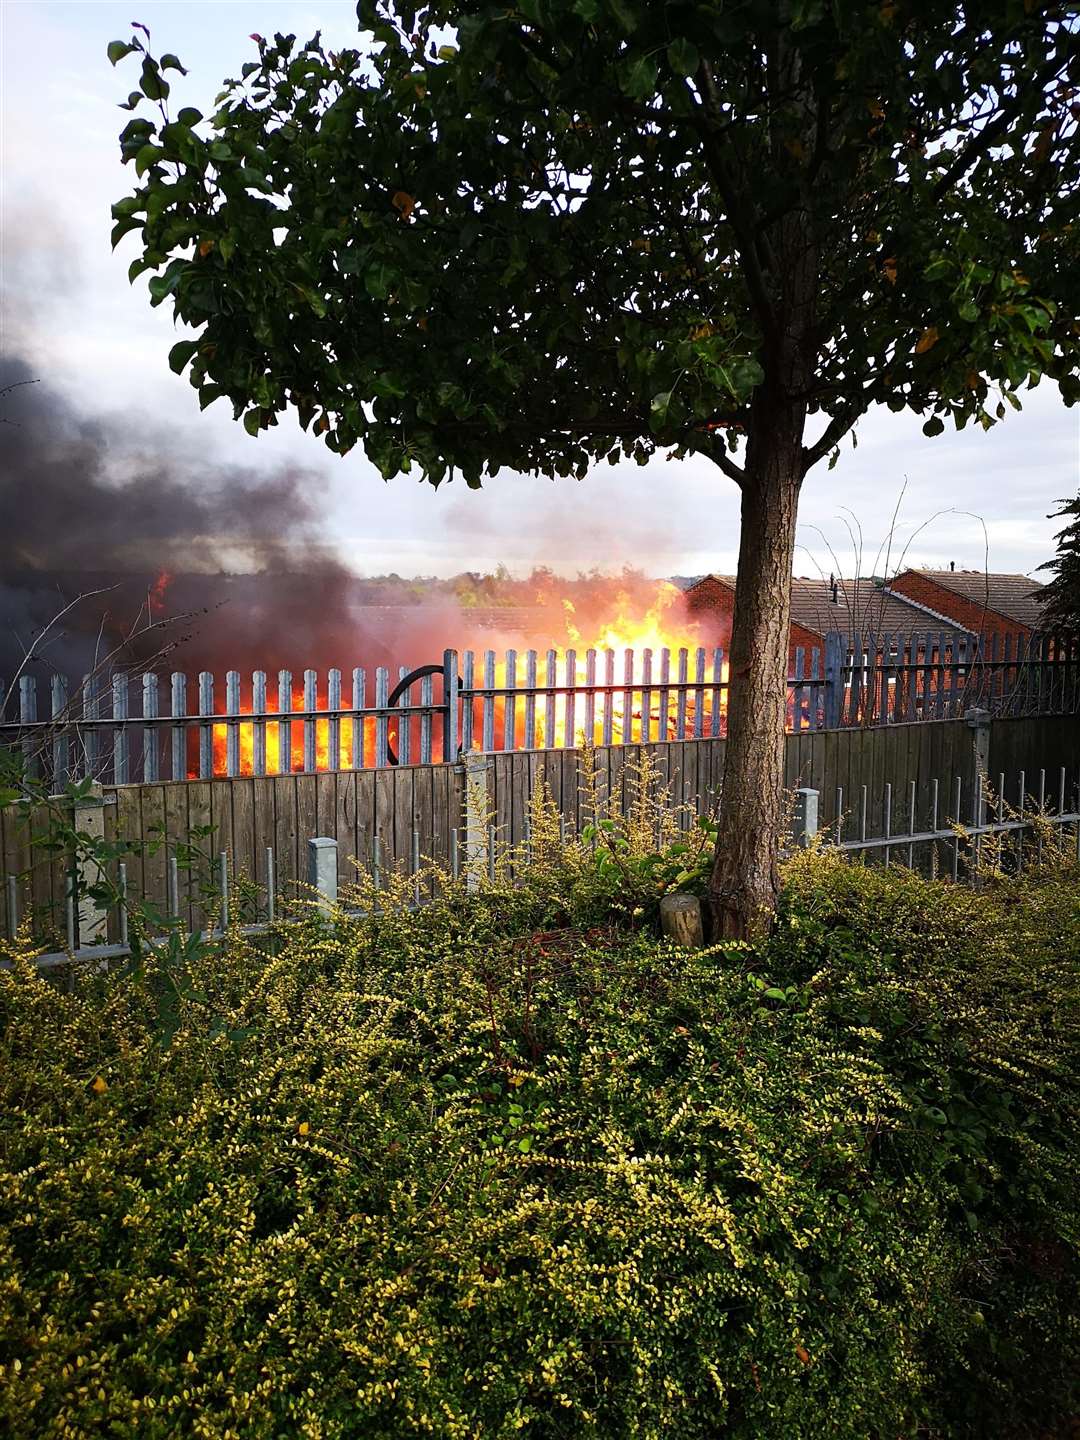 A caravan and sheds were set on fire in a suspected arson attack in Gravesend. (4770220)